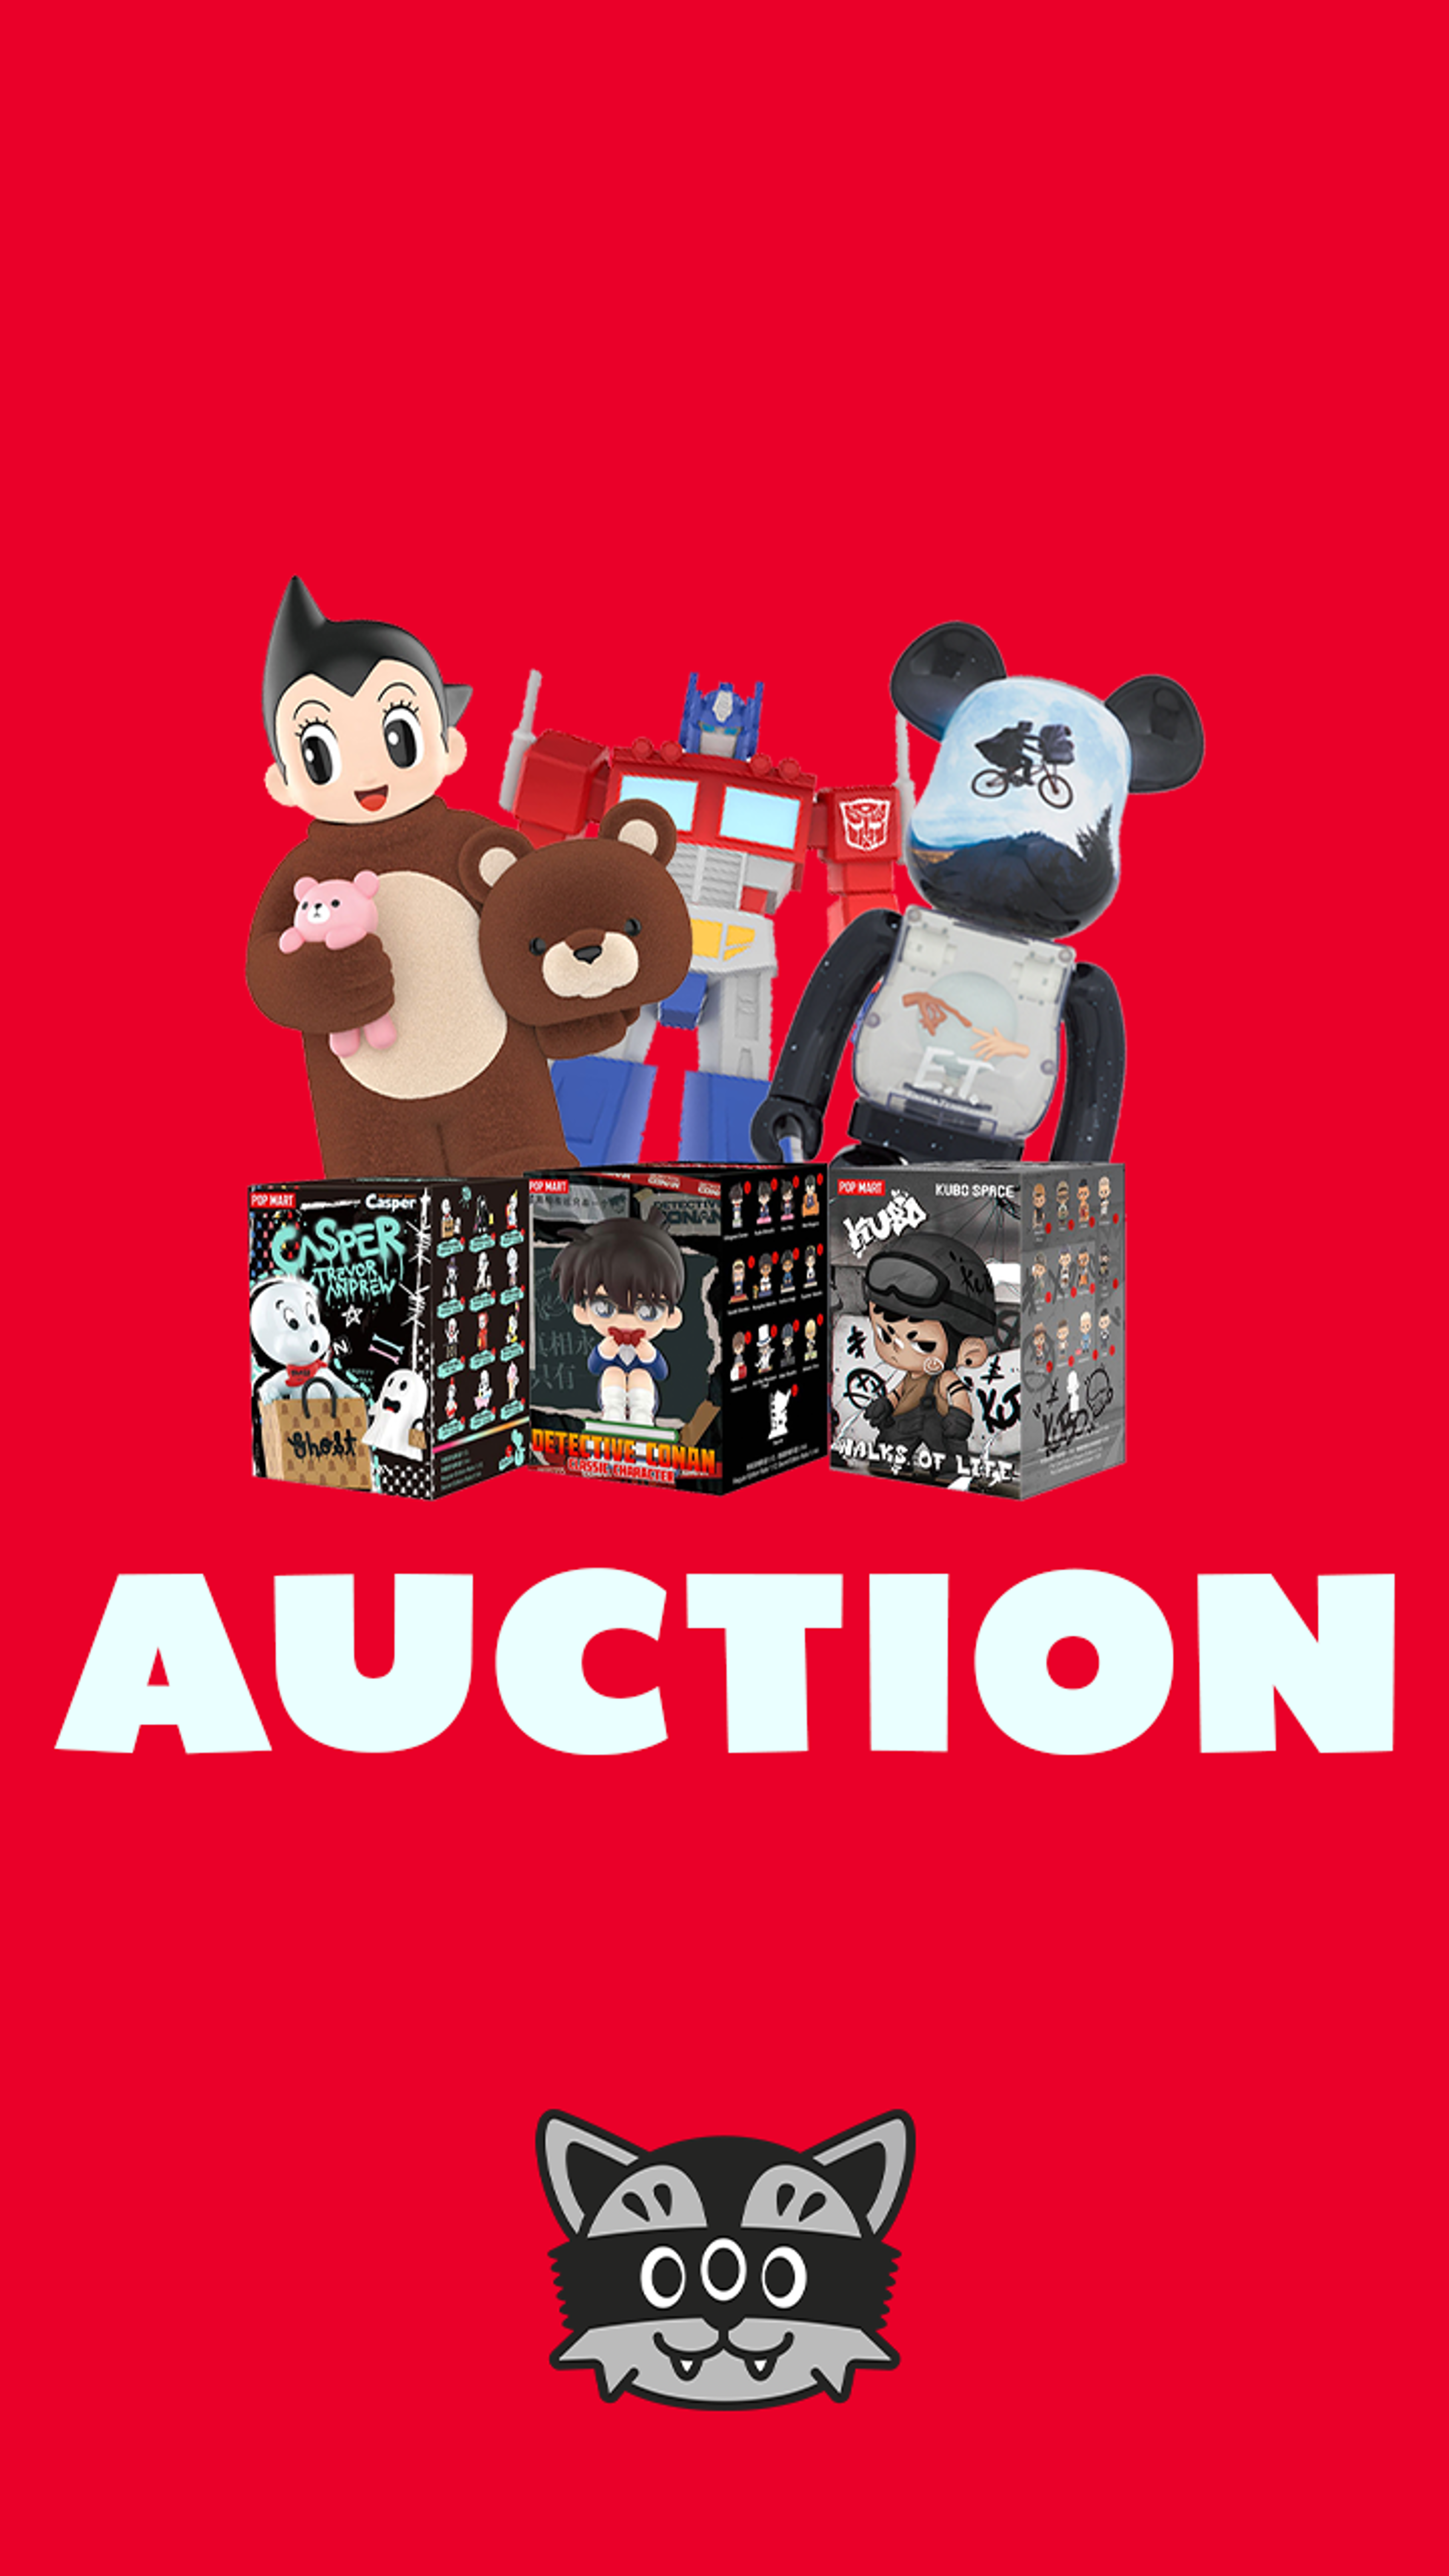 Preview image for the show titled "Mindzai Auction - April 17" at Today @ 5:00 PM